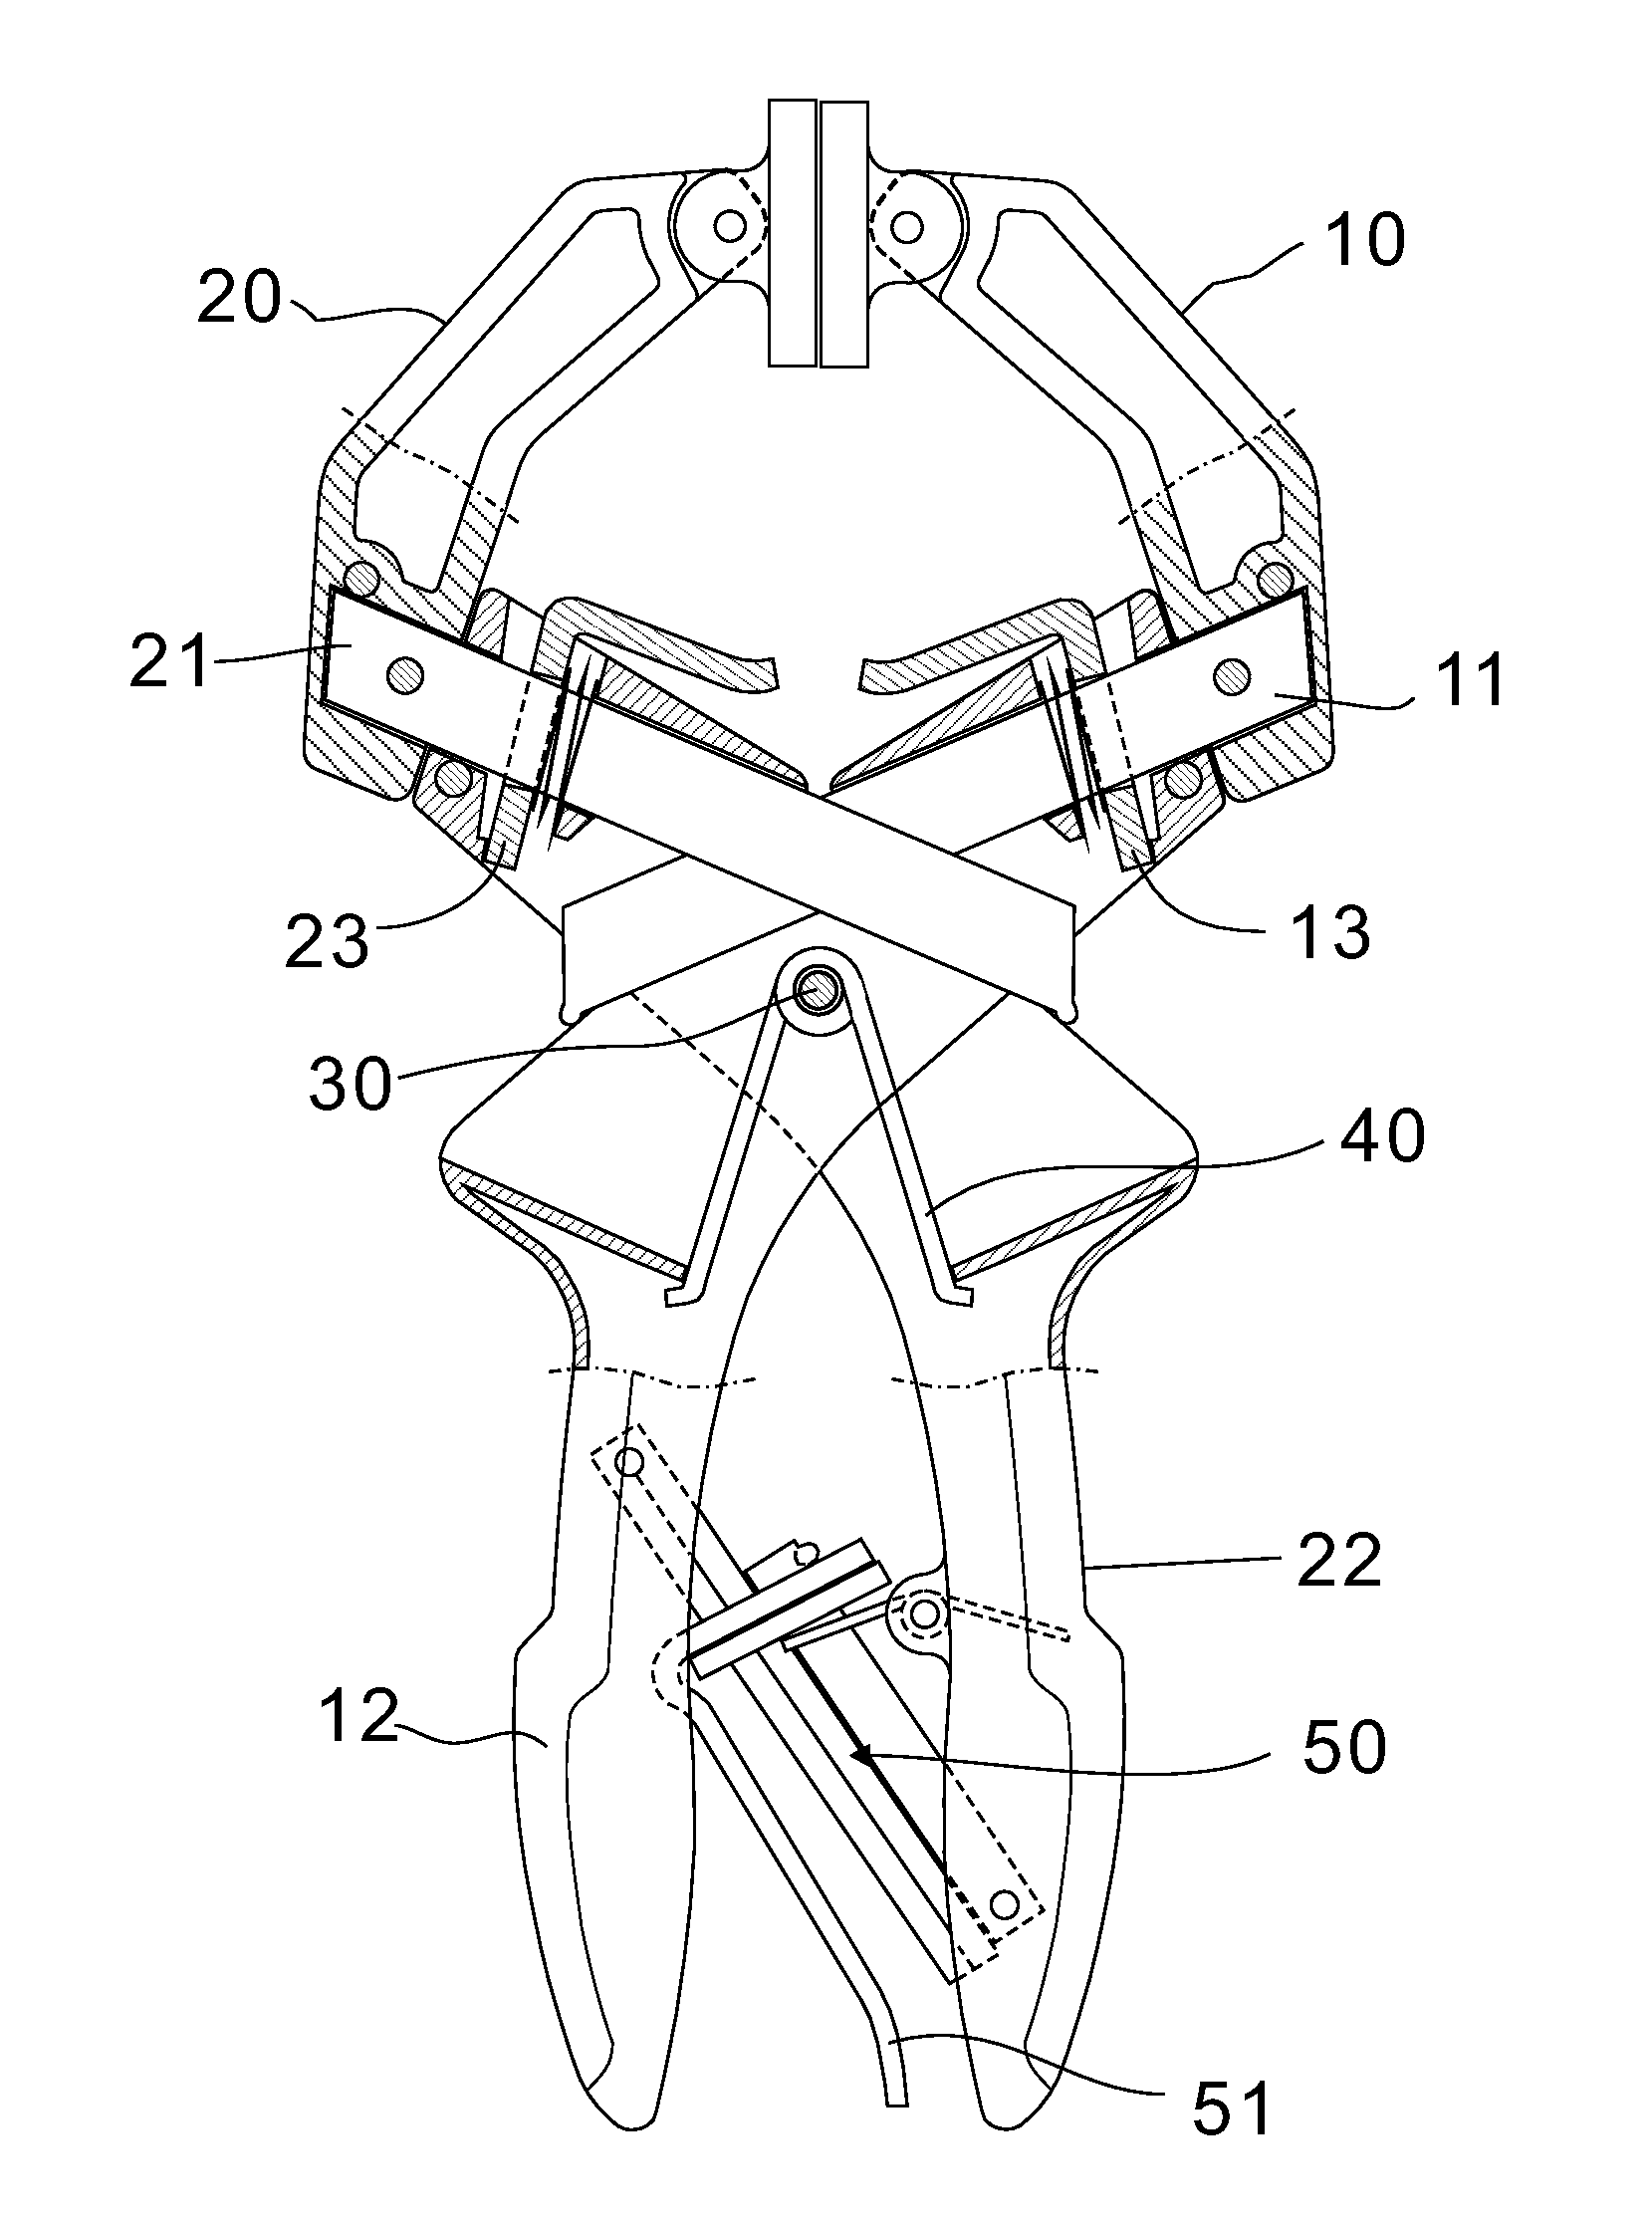 Locking pliers with one or two slide bars each secured to a stationary jaw carrier